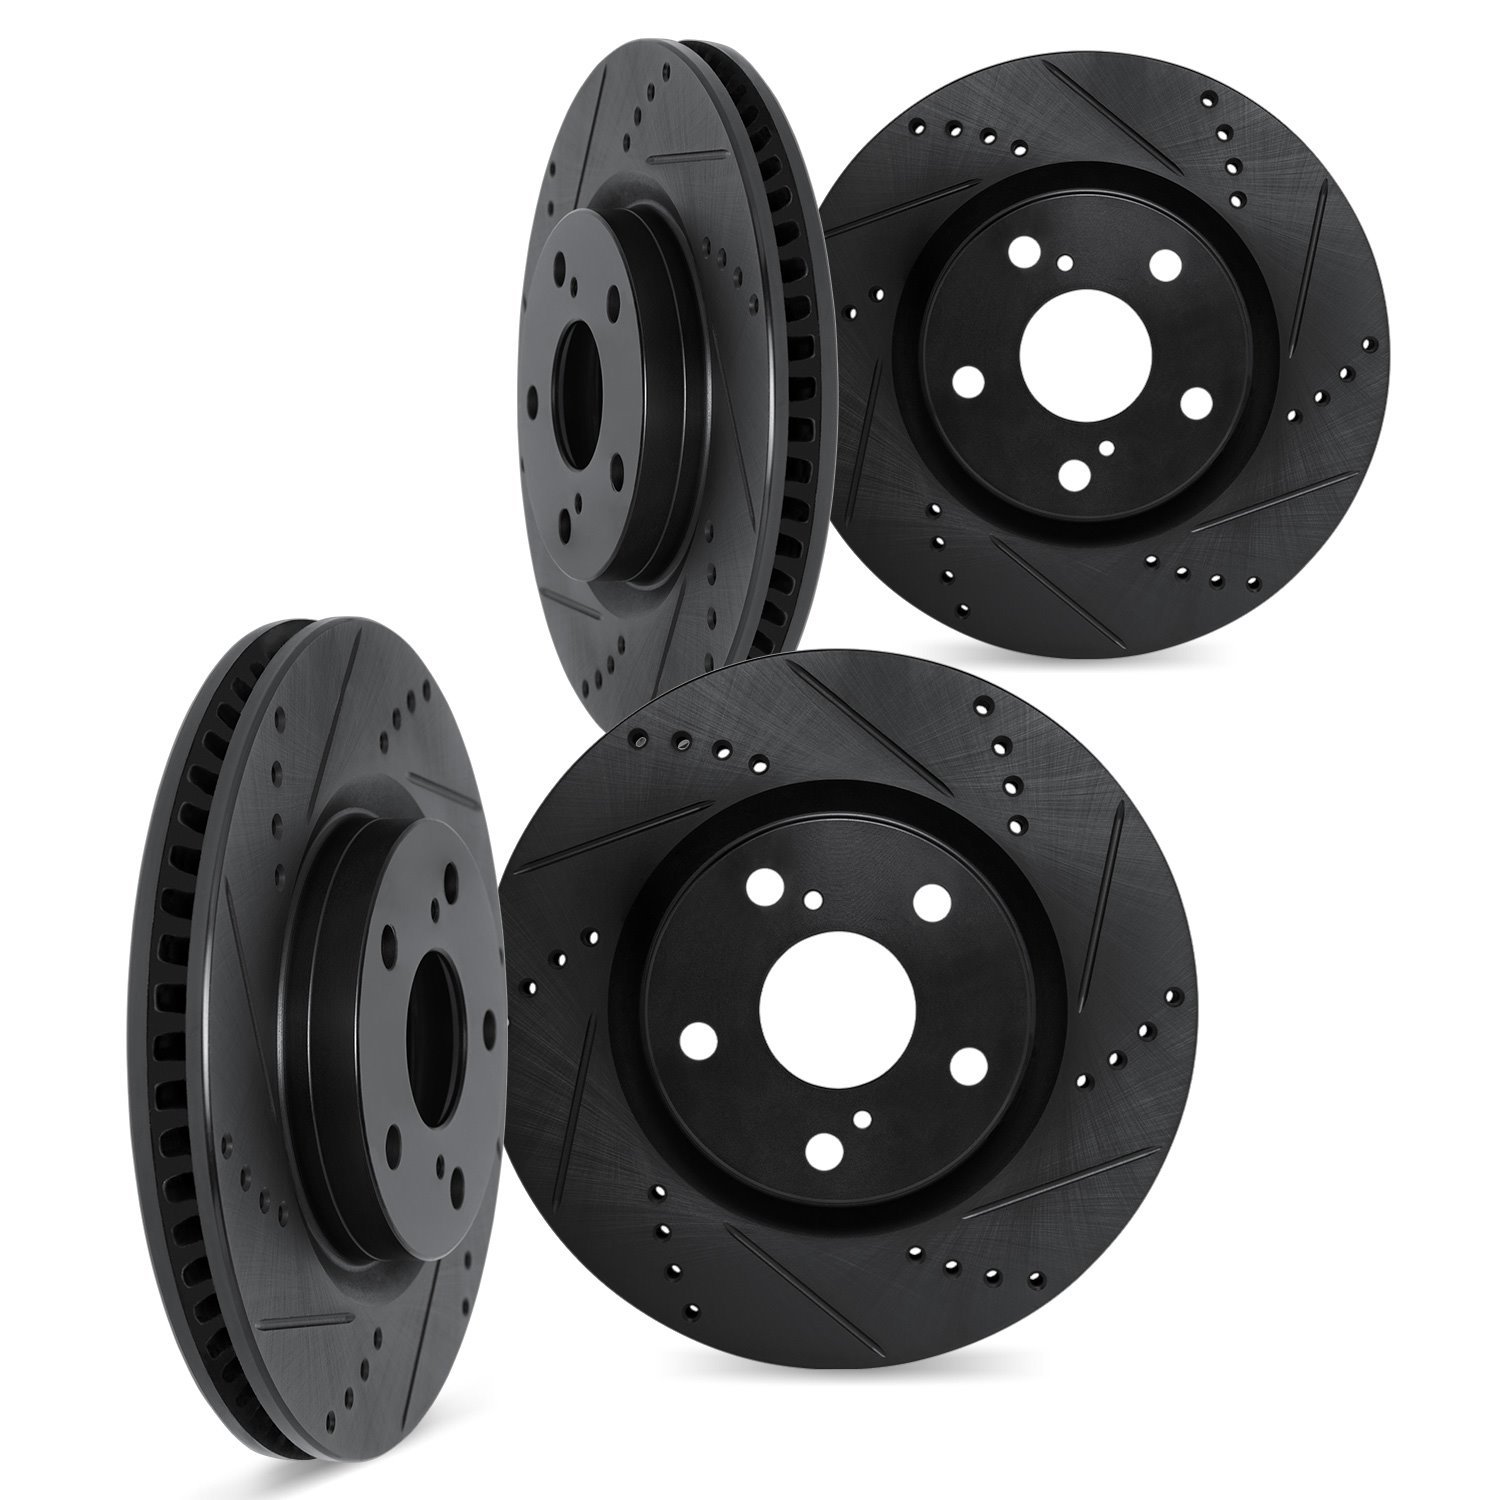 8004-75020 Drilled/Slotted Brake Rotors [Black], 1991-1992 Lexus/Toyota/Scion, Position: Front and Rear